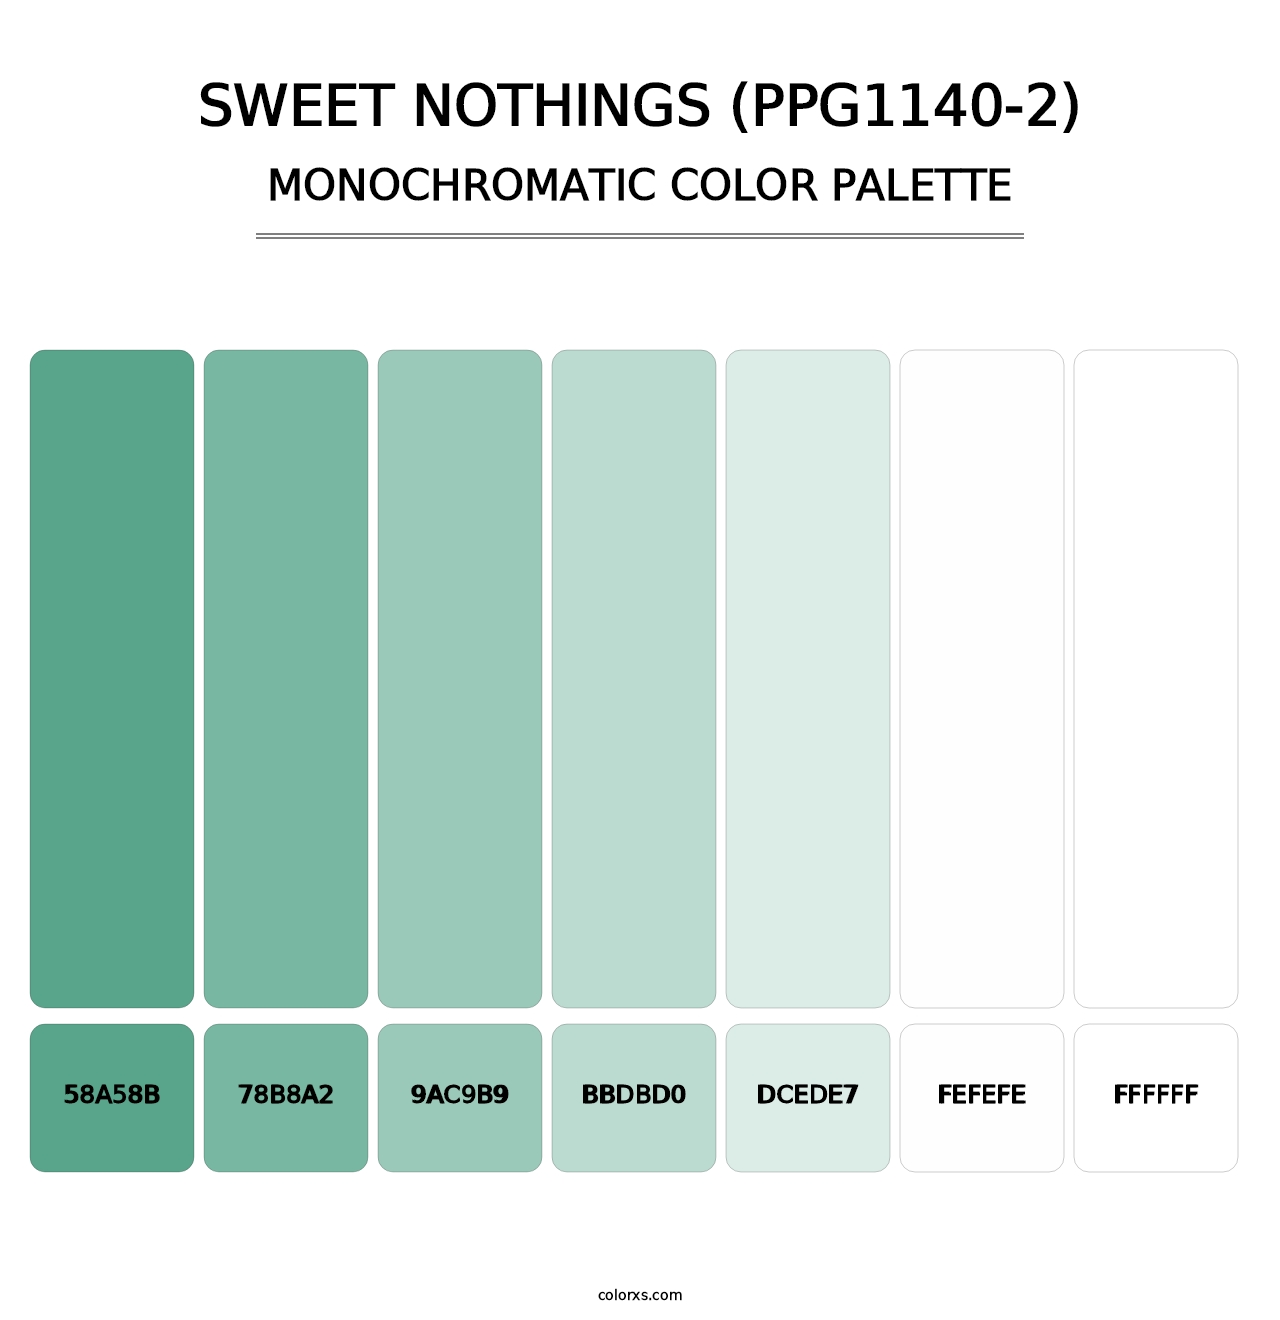 Sweet Nothings (PPG1140-2) - Monochromatic Color Palette